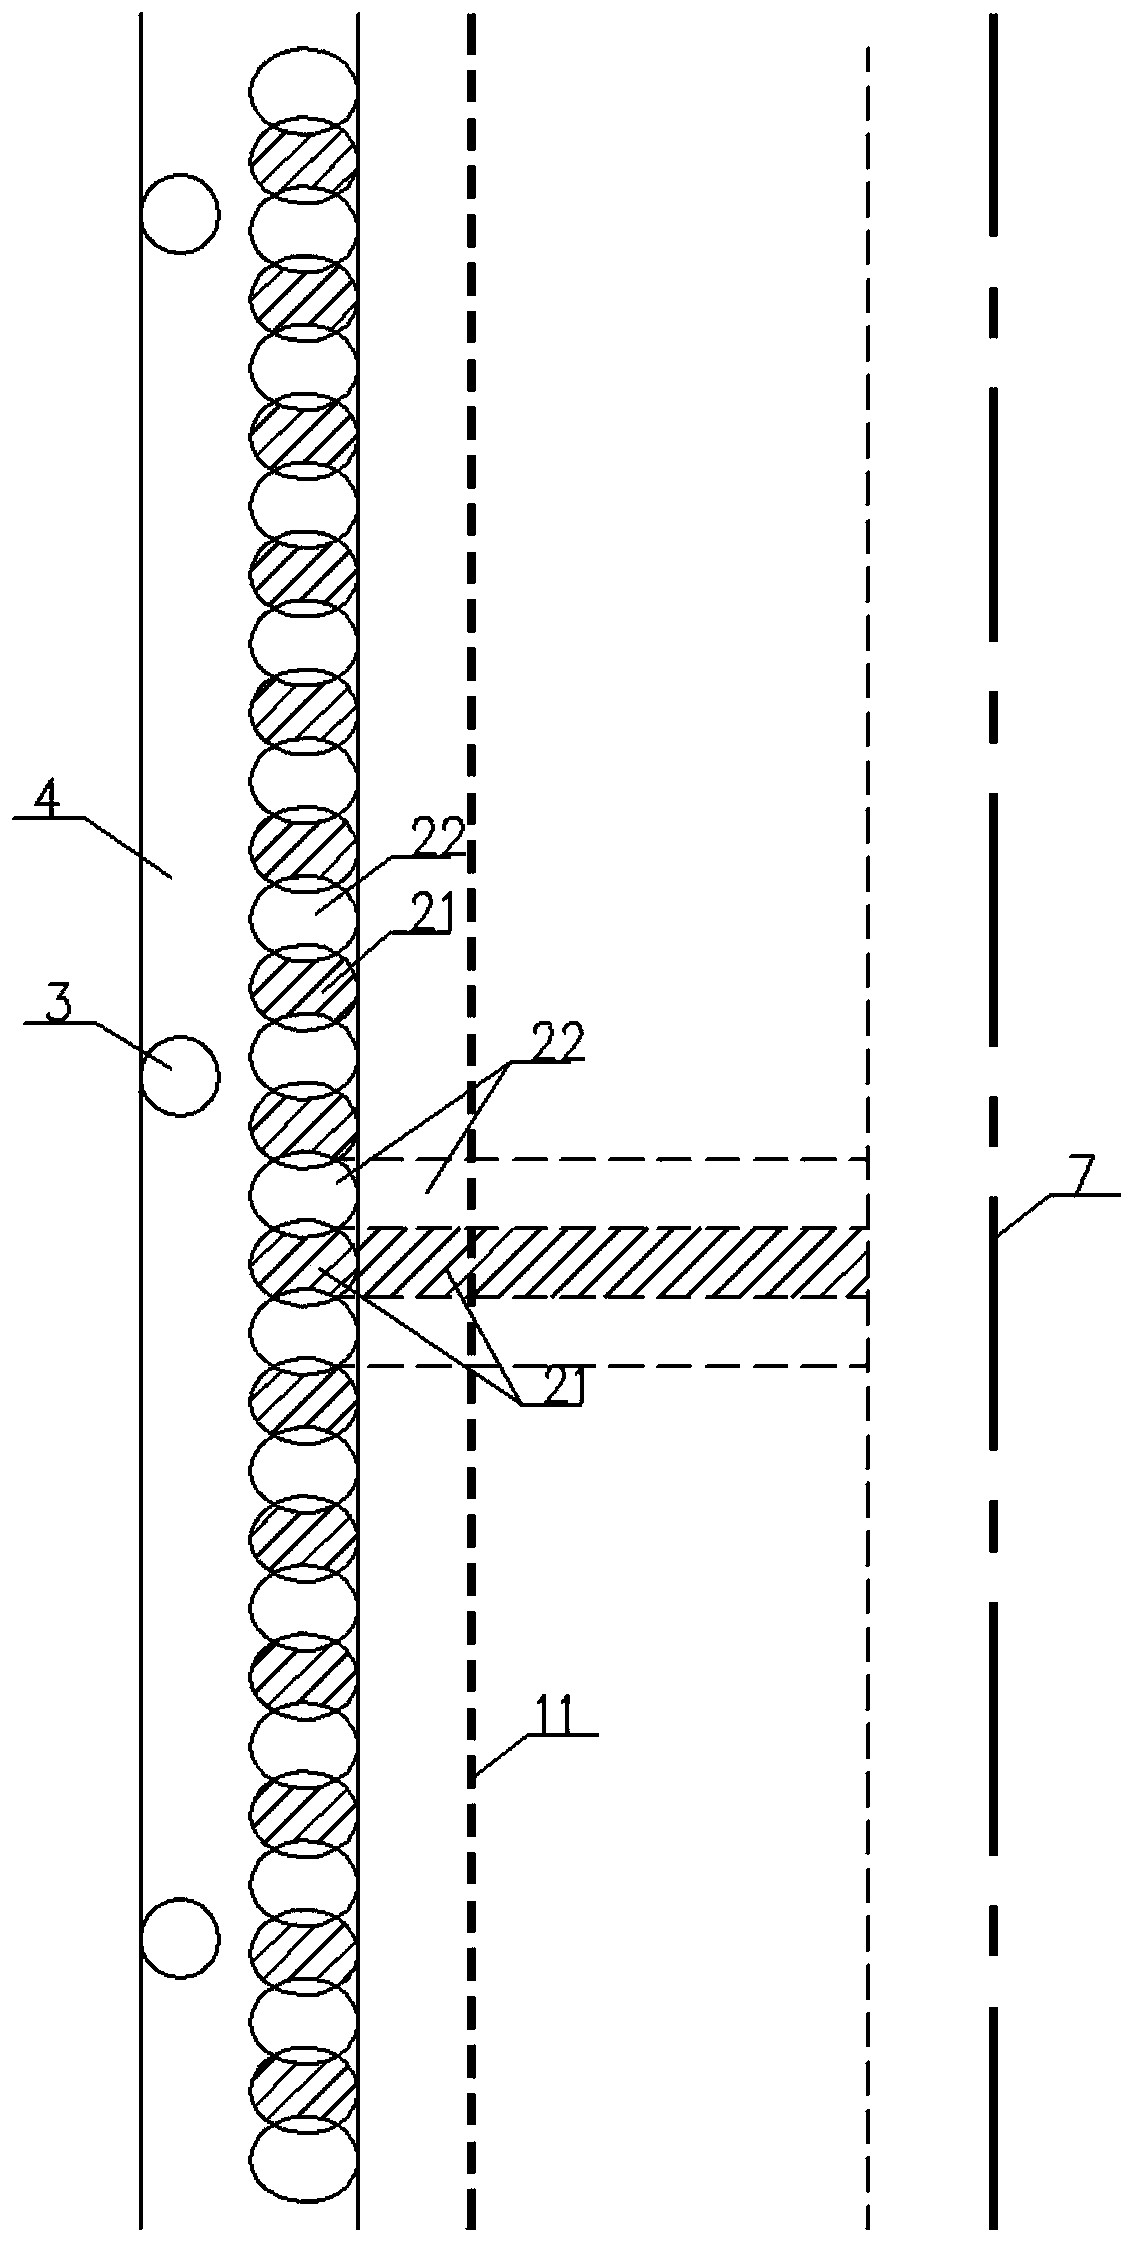 A foundation pit support structure supported by inclined pile walls and its construction method